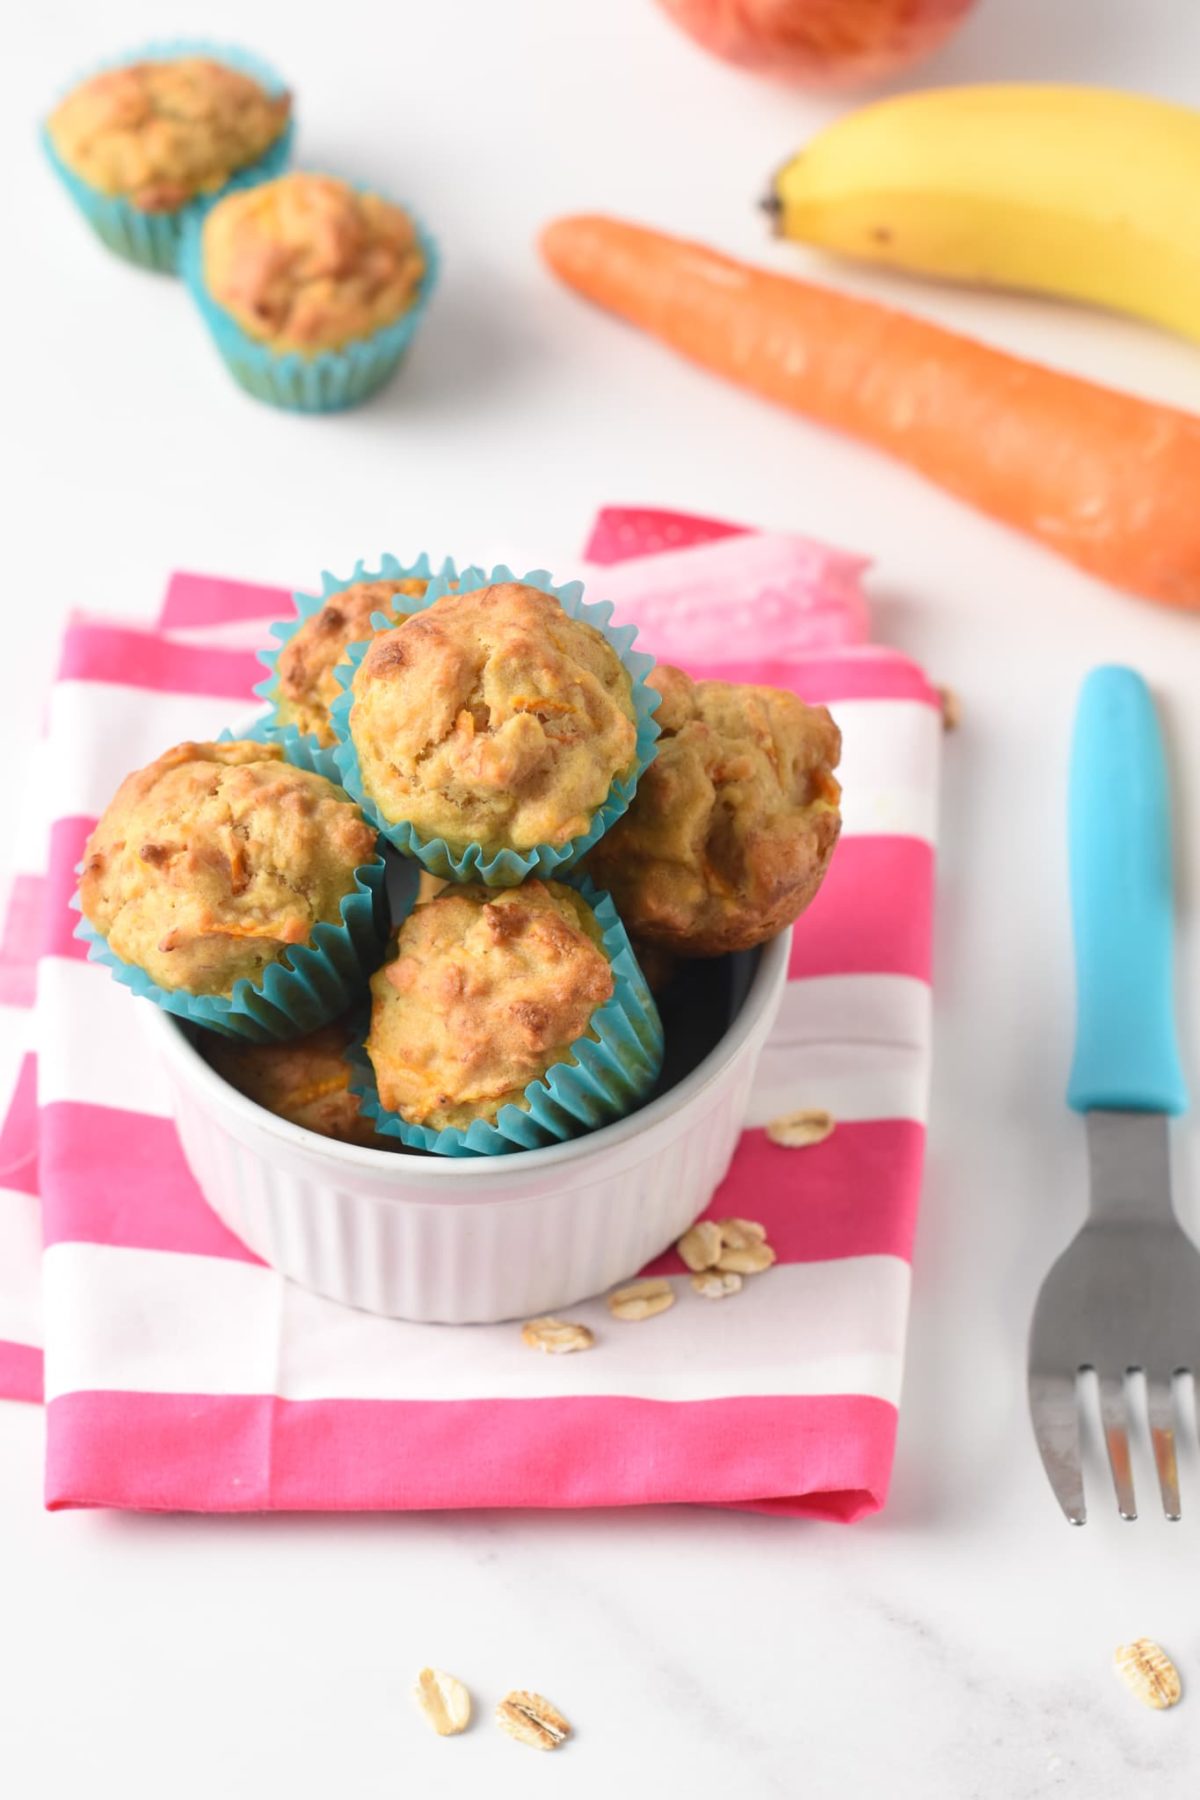 🍌🥕 Dive into these ABC (Apple Banana Carrot) cupcakes from @zenatewhat  using the new @bydash Mini Cupcake Maker! They're a scrumptious way…